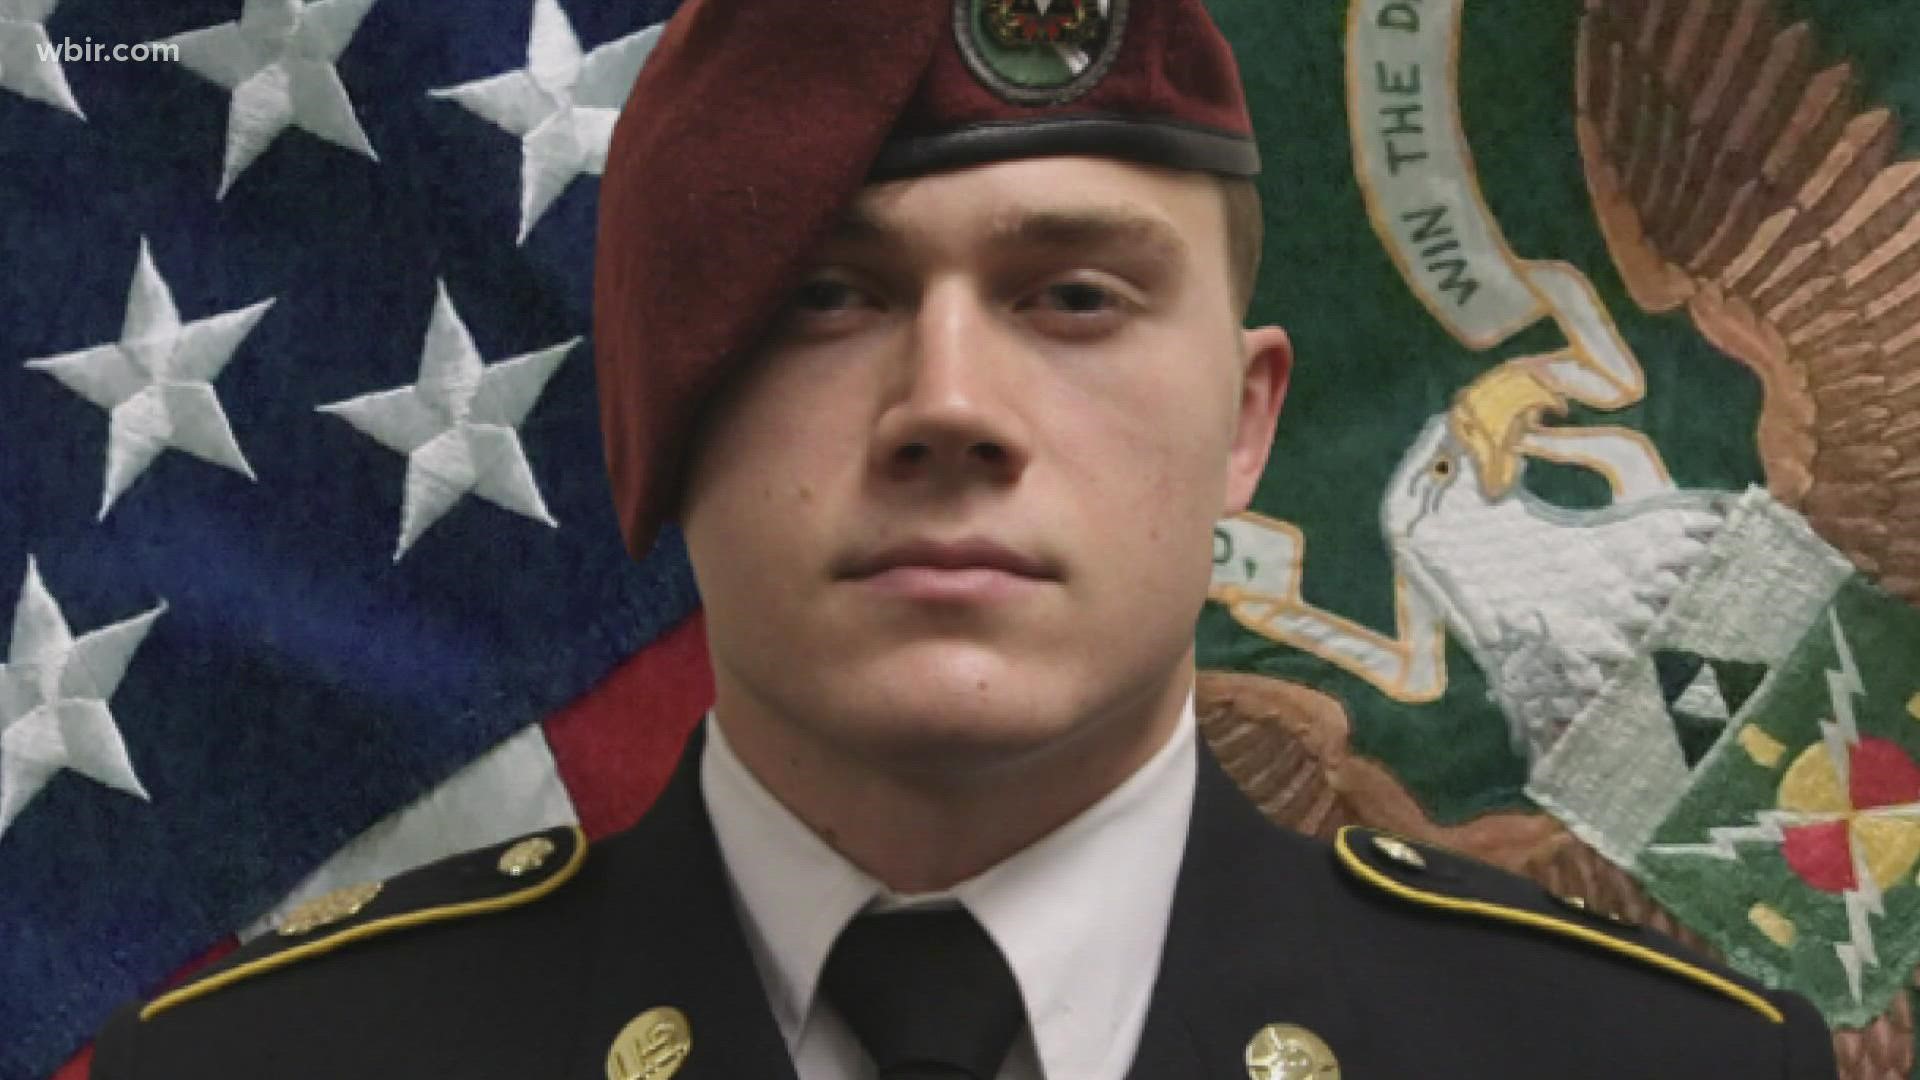 The public was invited to pay their respects to Staff Sgt. Ryan Knauss at Gibbs High School on Saturday at 5 p.m.